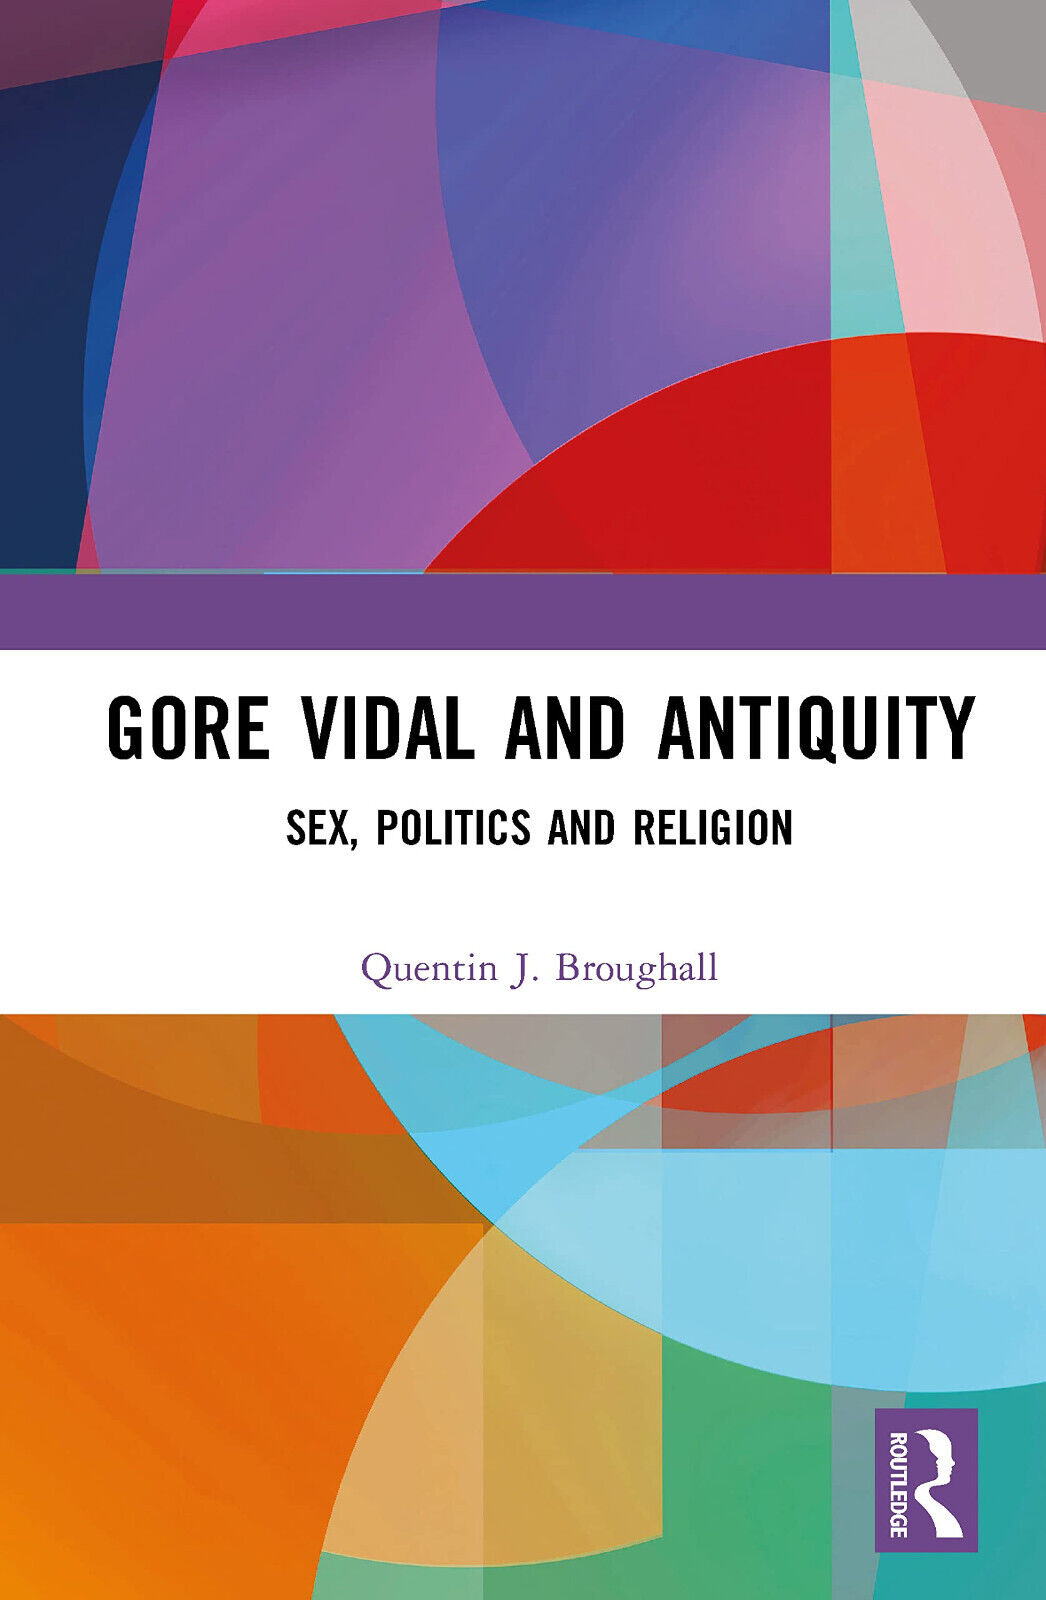 Gore Vidal And Antiquity - Quentin Broughall - Routledge, 2022